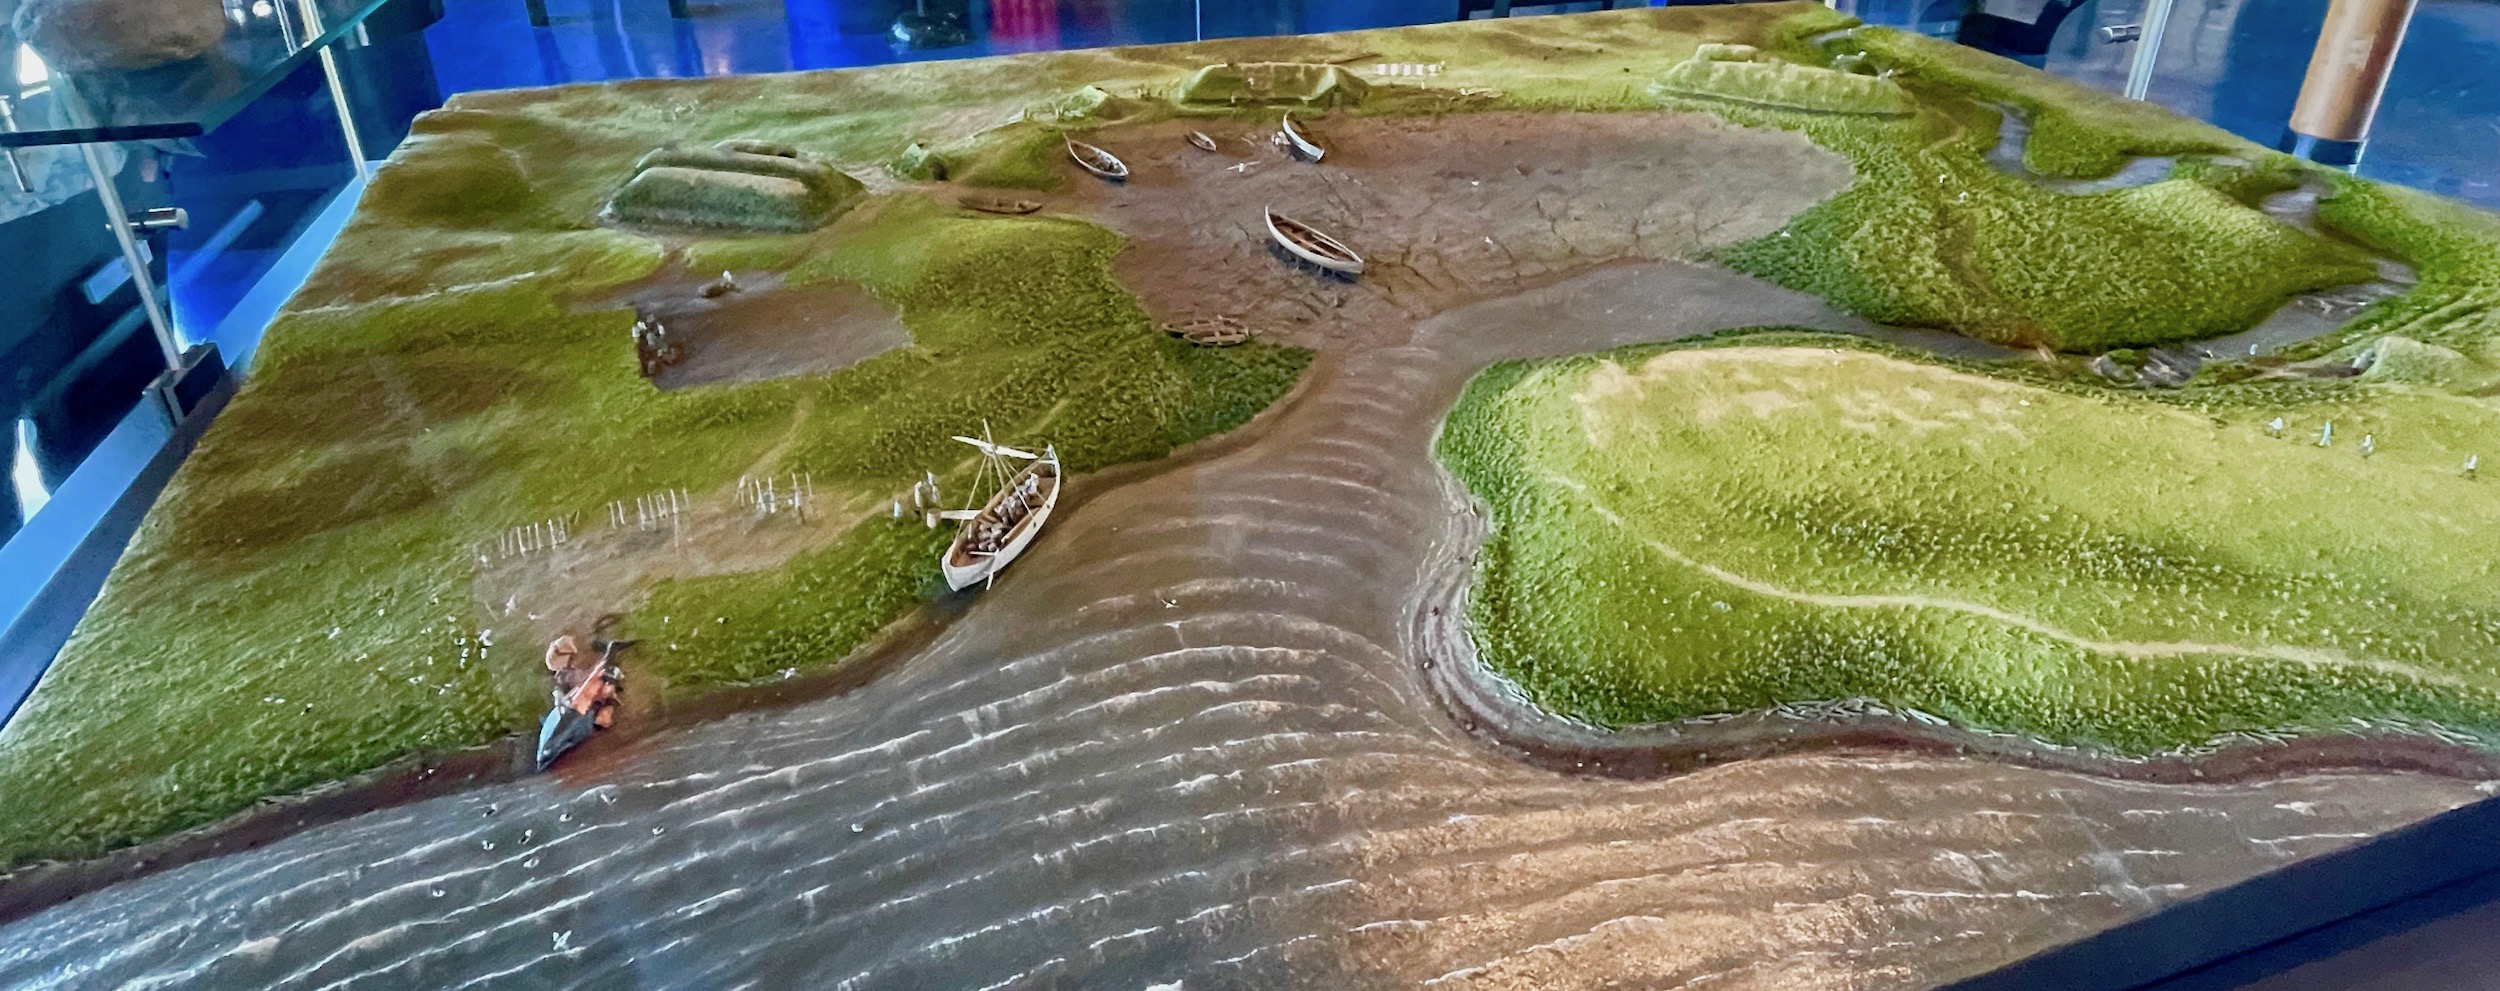 Model of "'Anse aux Meadows